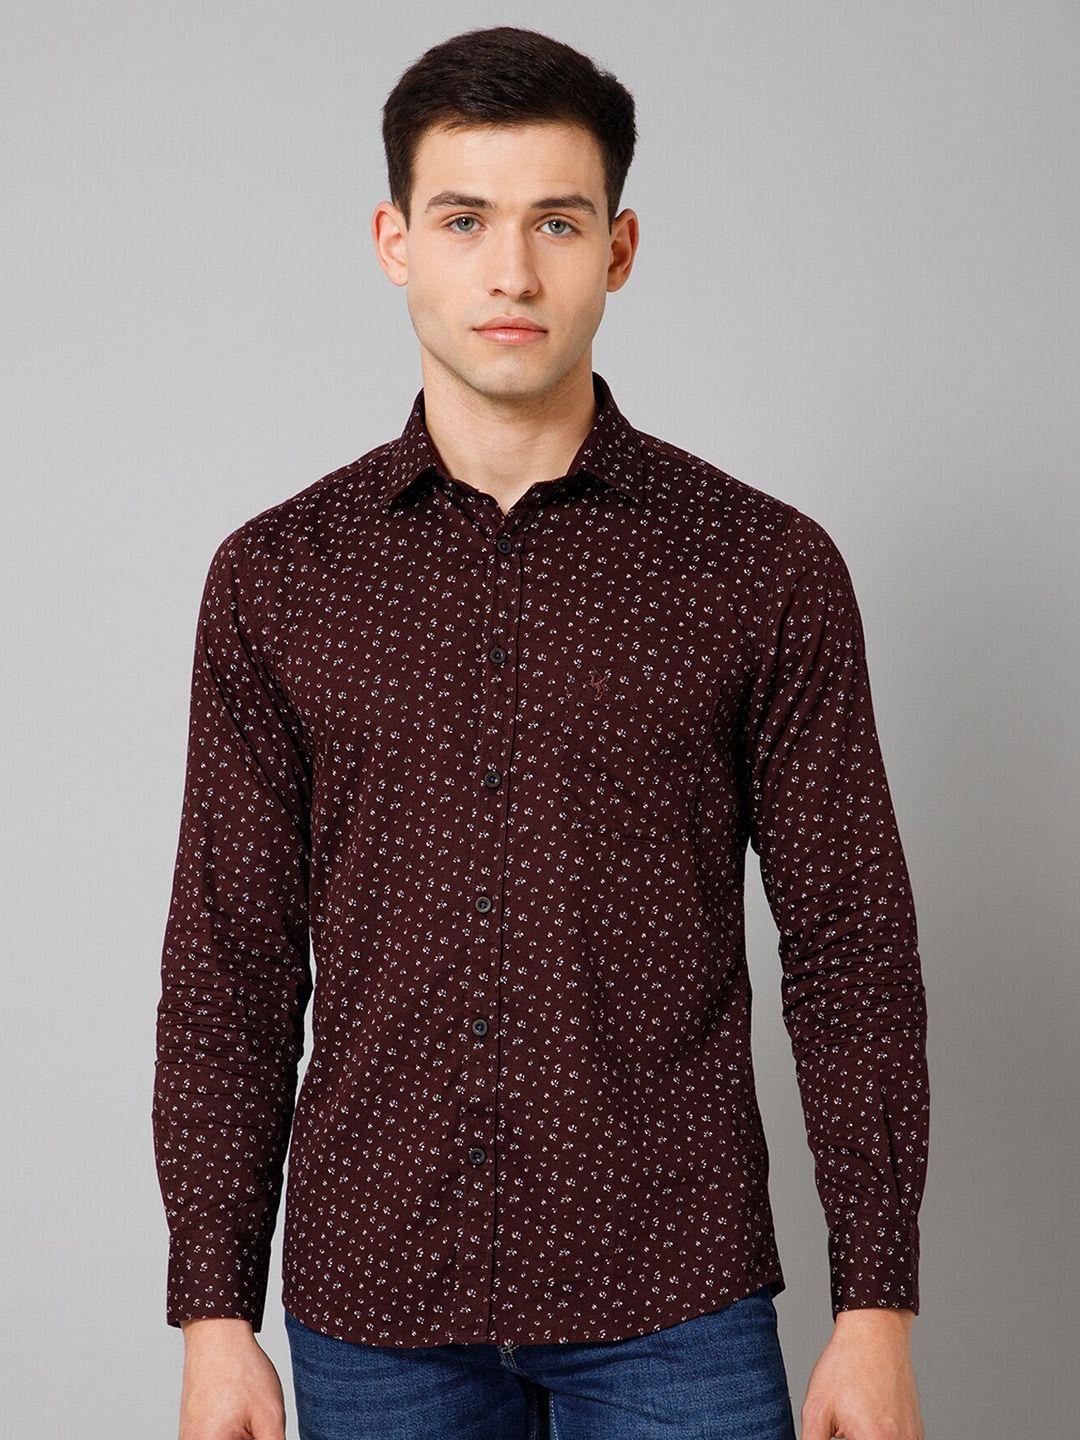 cantabil-floral-printed-comfort-cotton-casual-shirt